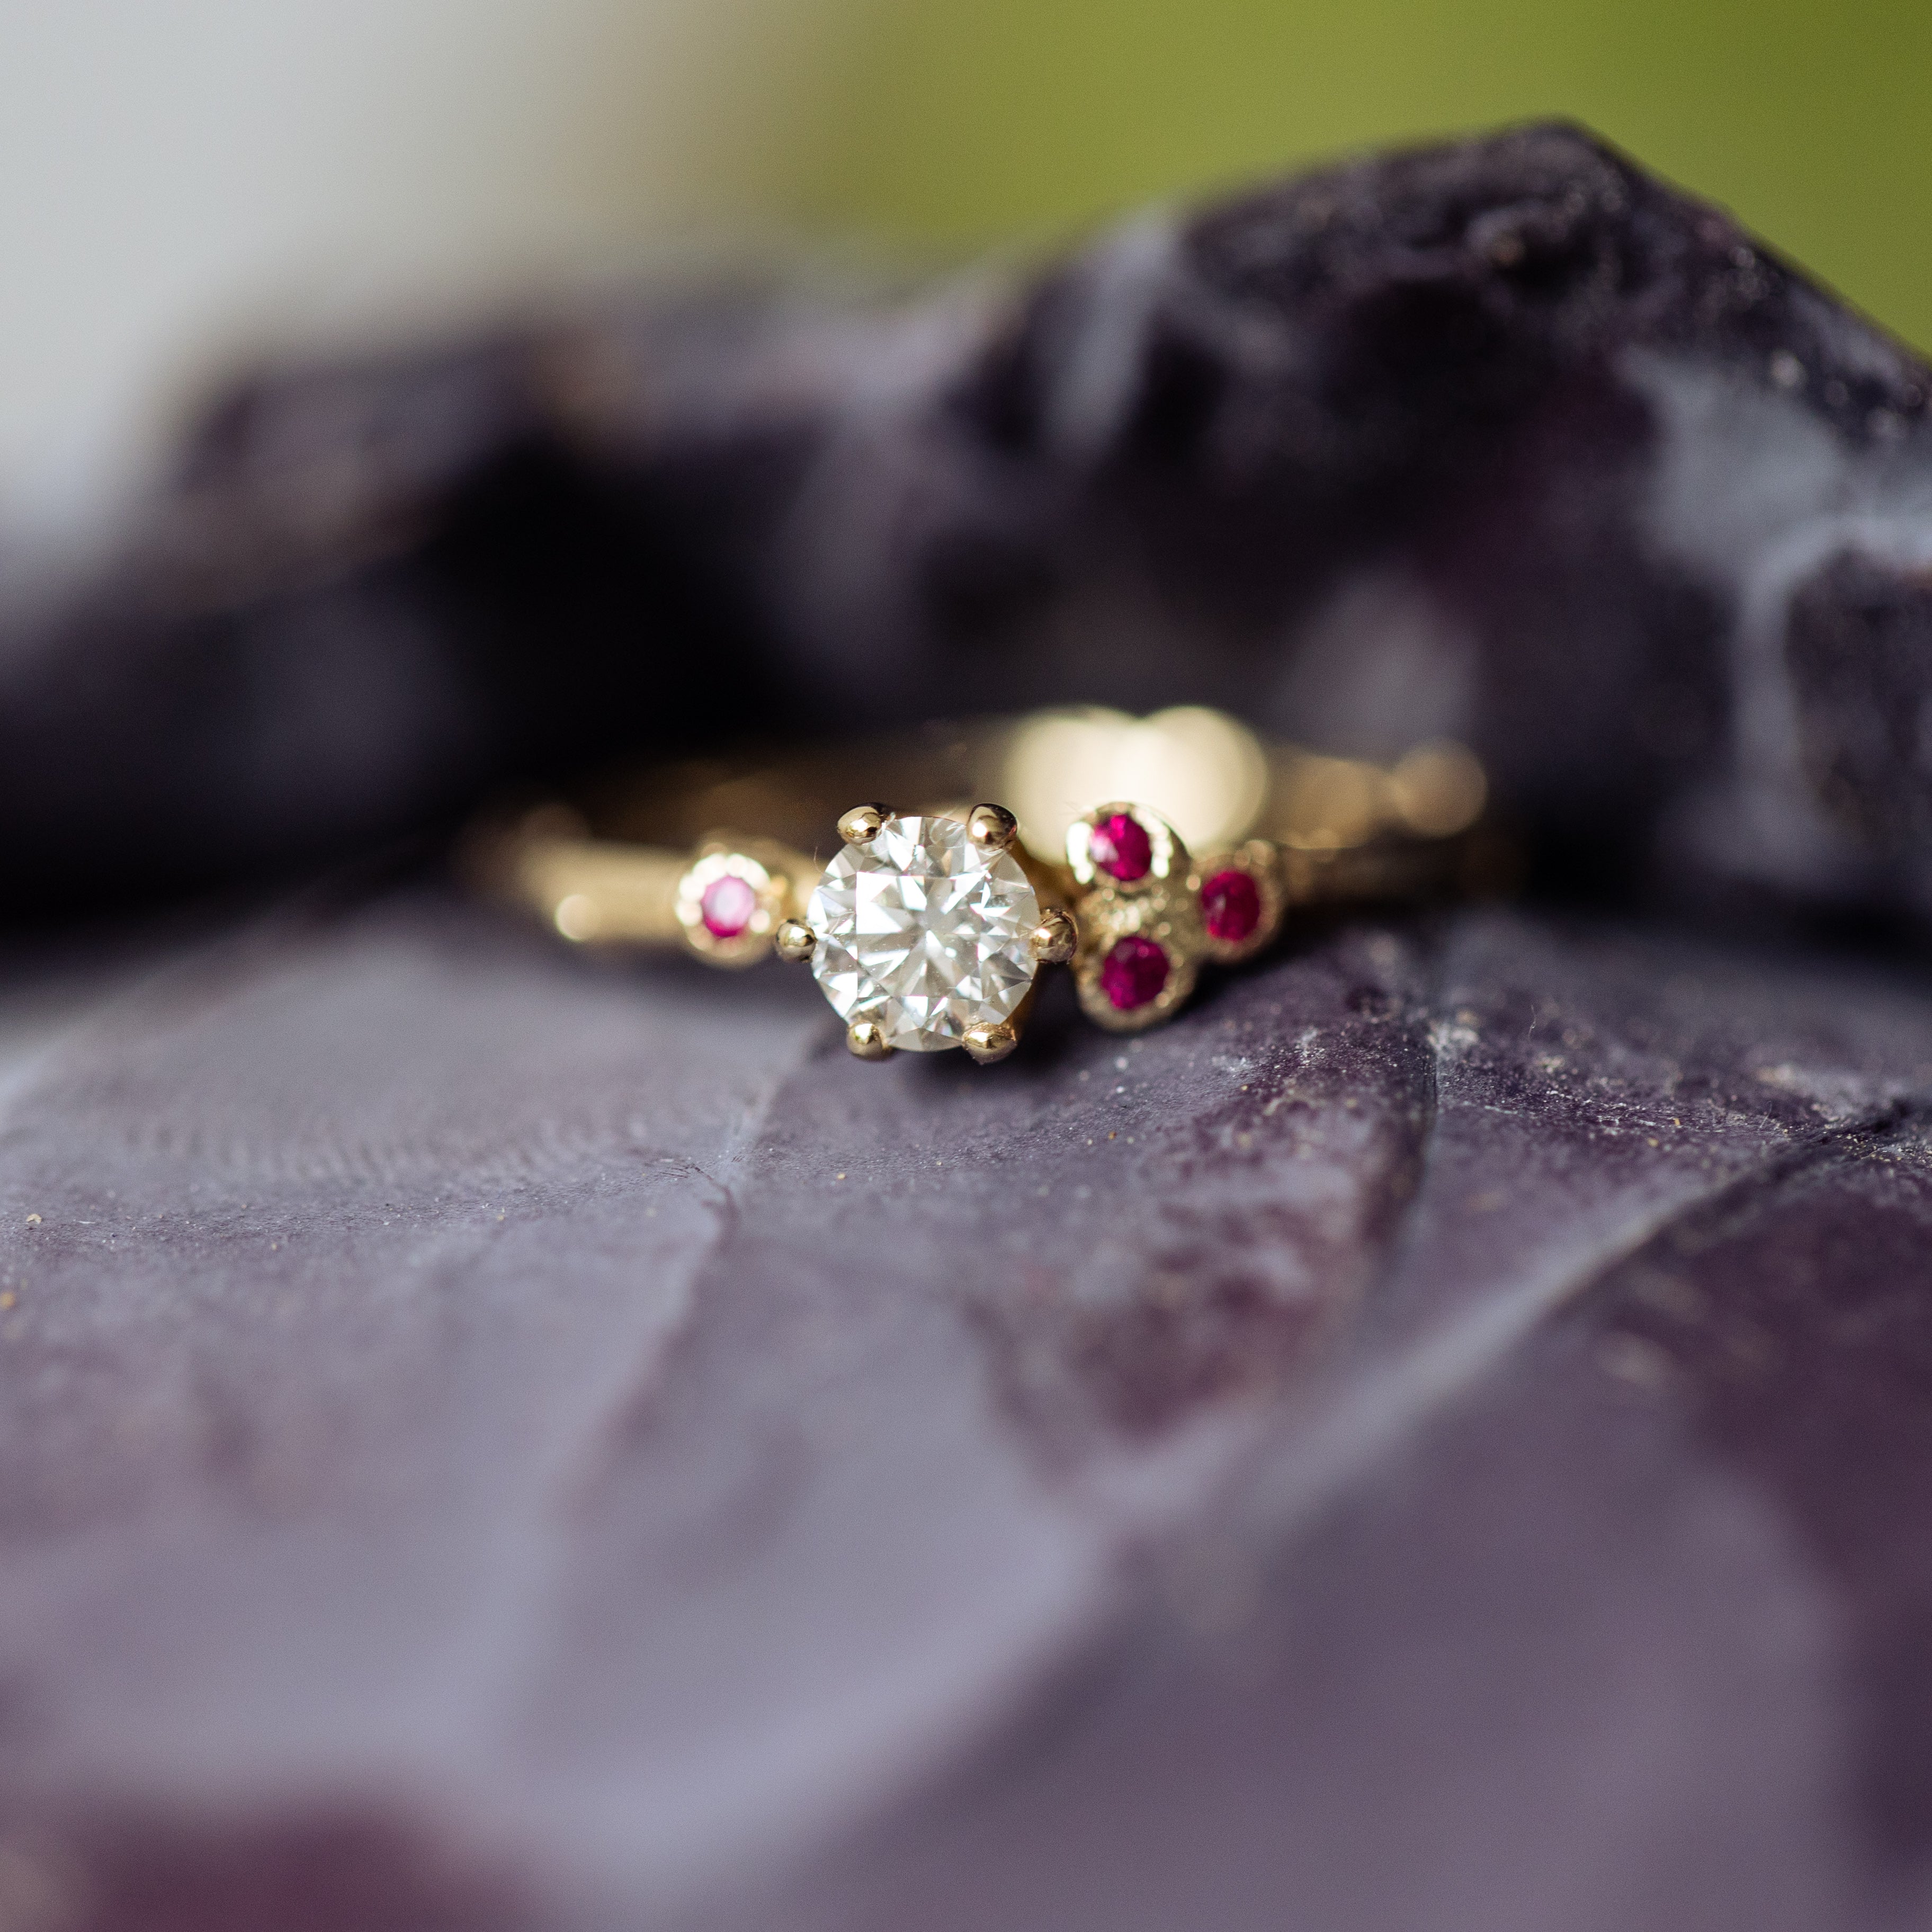 Asymmetric cluster ring with rubies